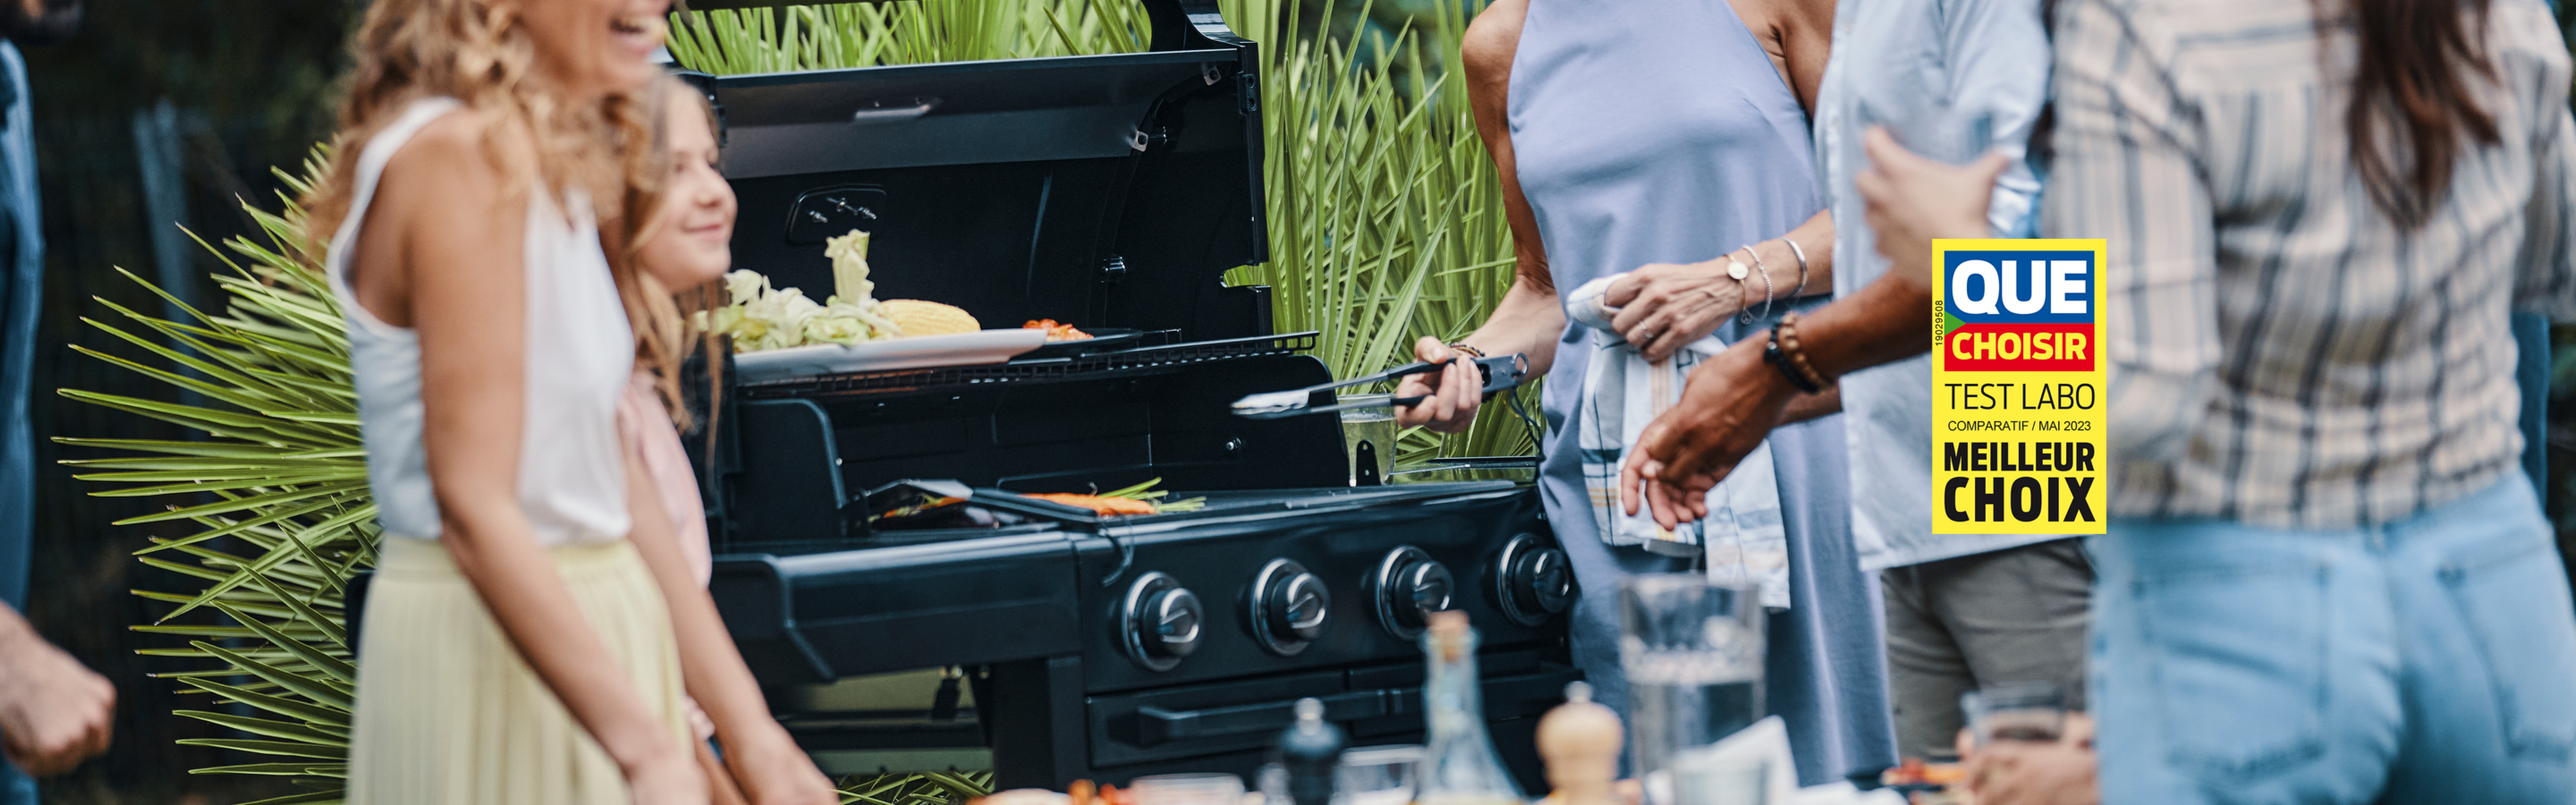 Barbecues - Guide d'achat - UFC-Que Choisir